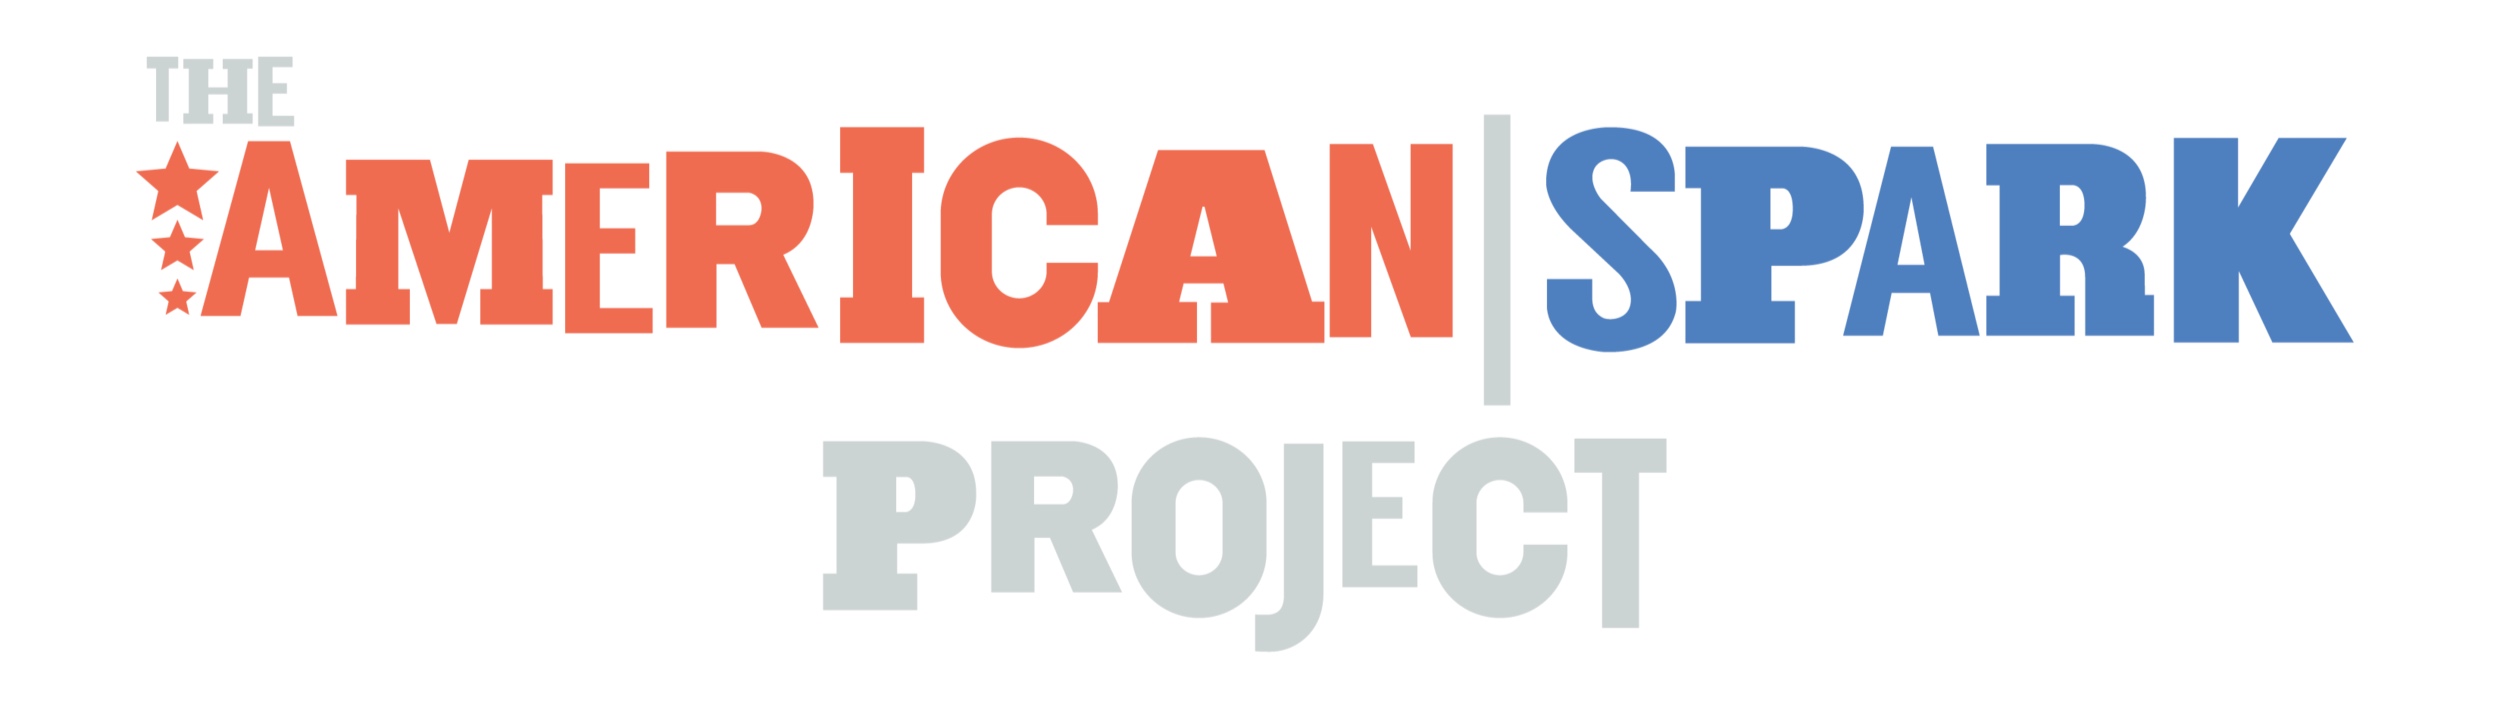 The American Spark Project